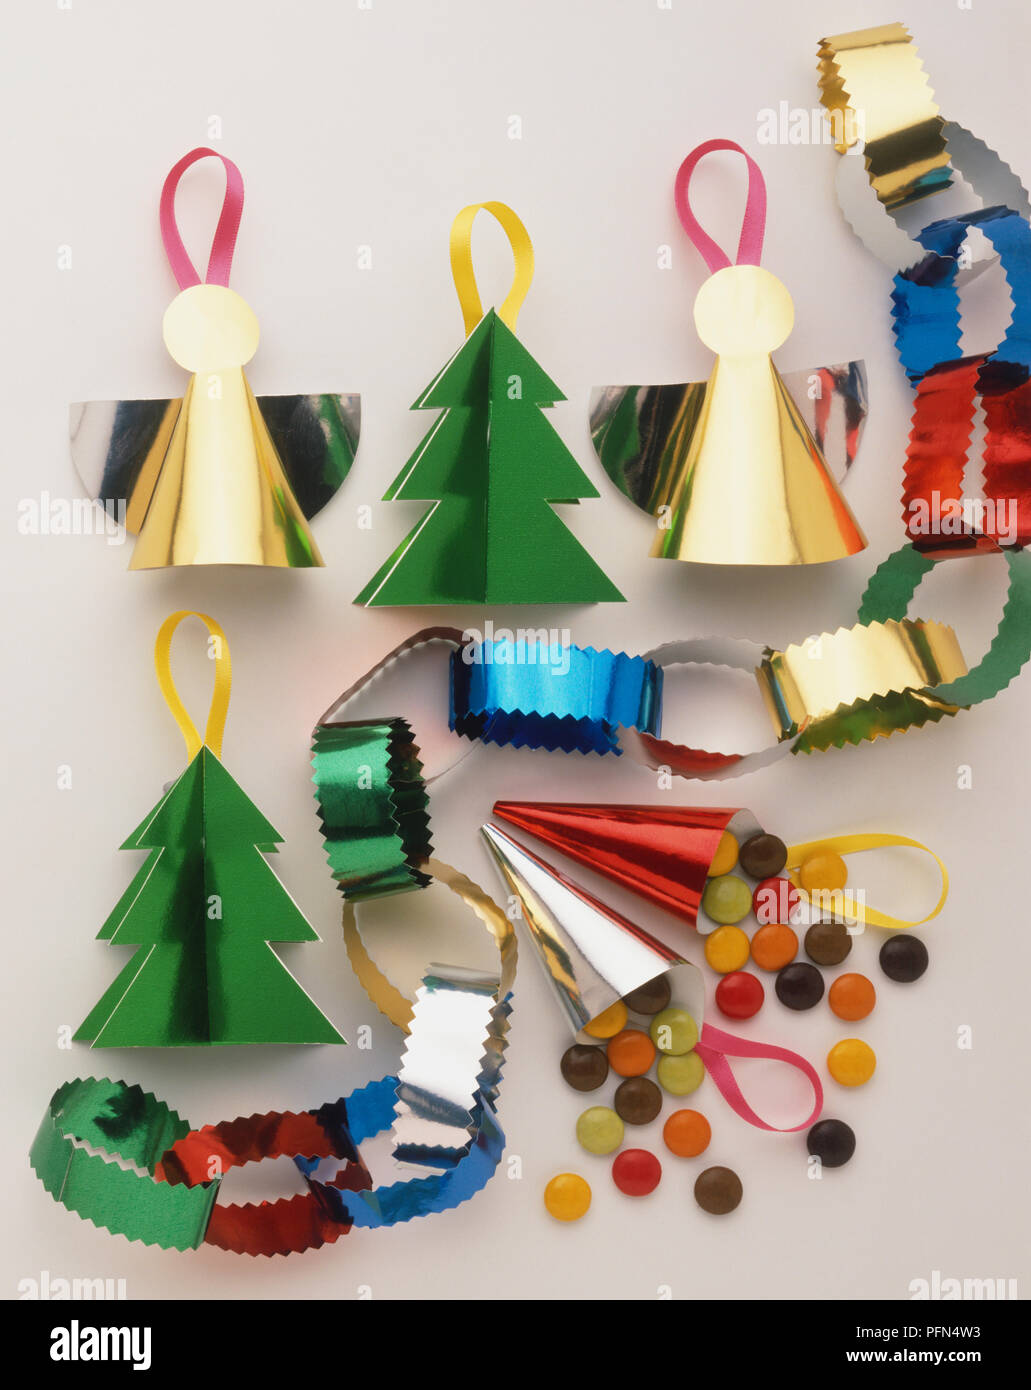 Selection Of Handmade Christmas Decorations Made From Shiny Coloured Paper Including Angels And Paper Chains Stock Photo Alamy